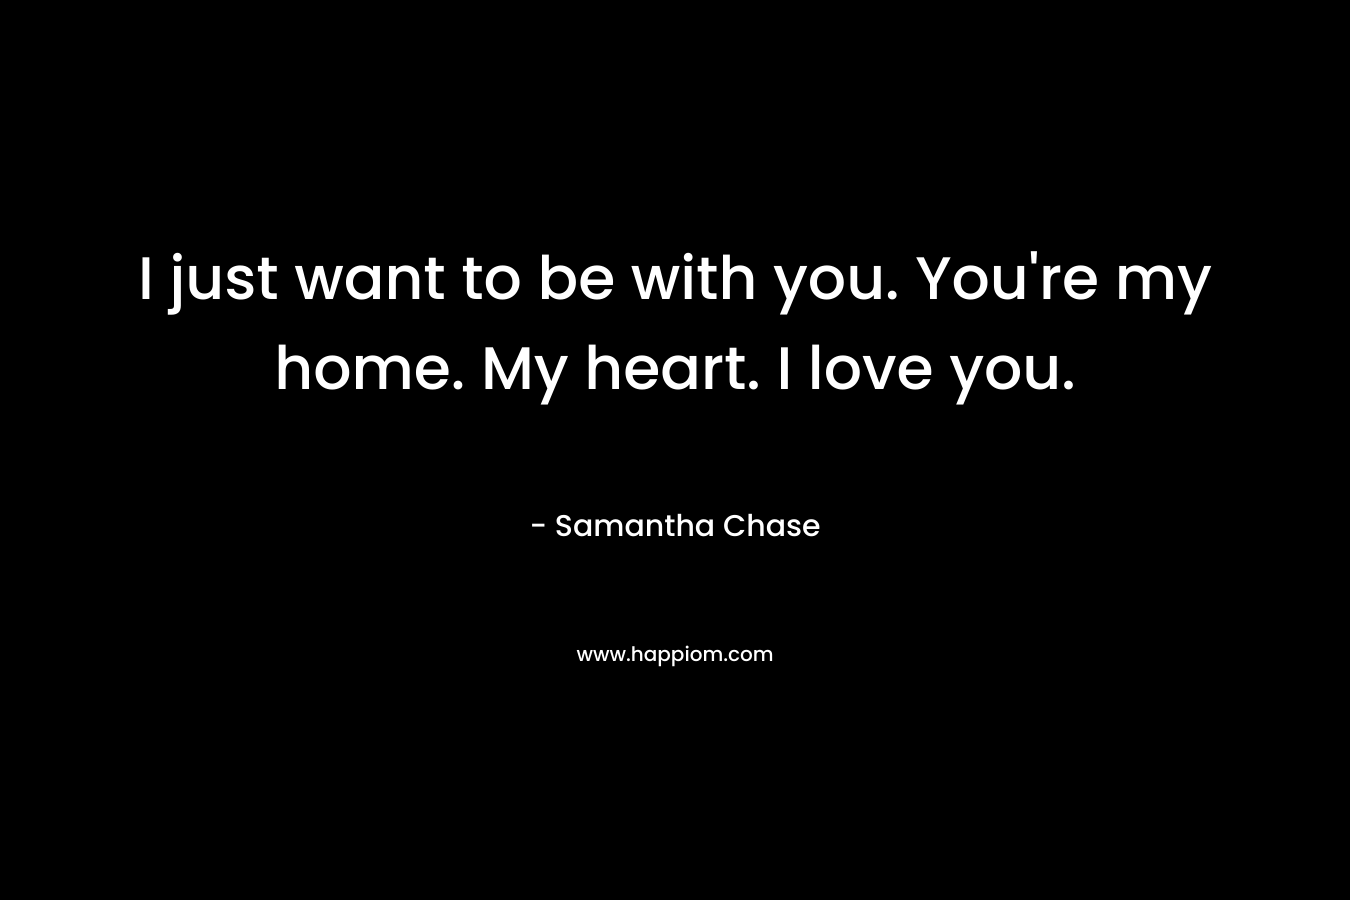 I just want to be with you. You’re my home. My heart. I love you. – Samantha Chase